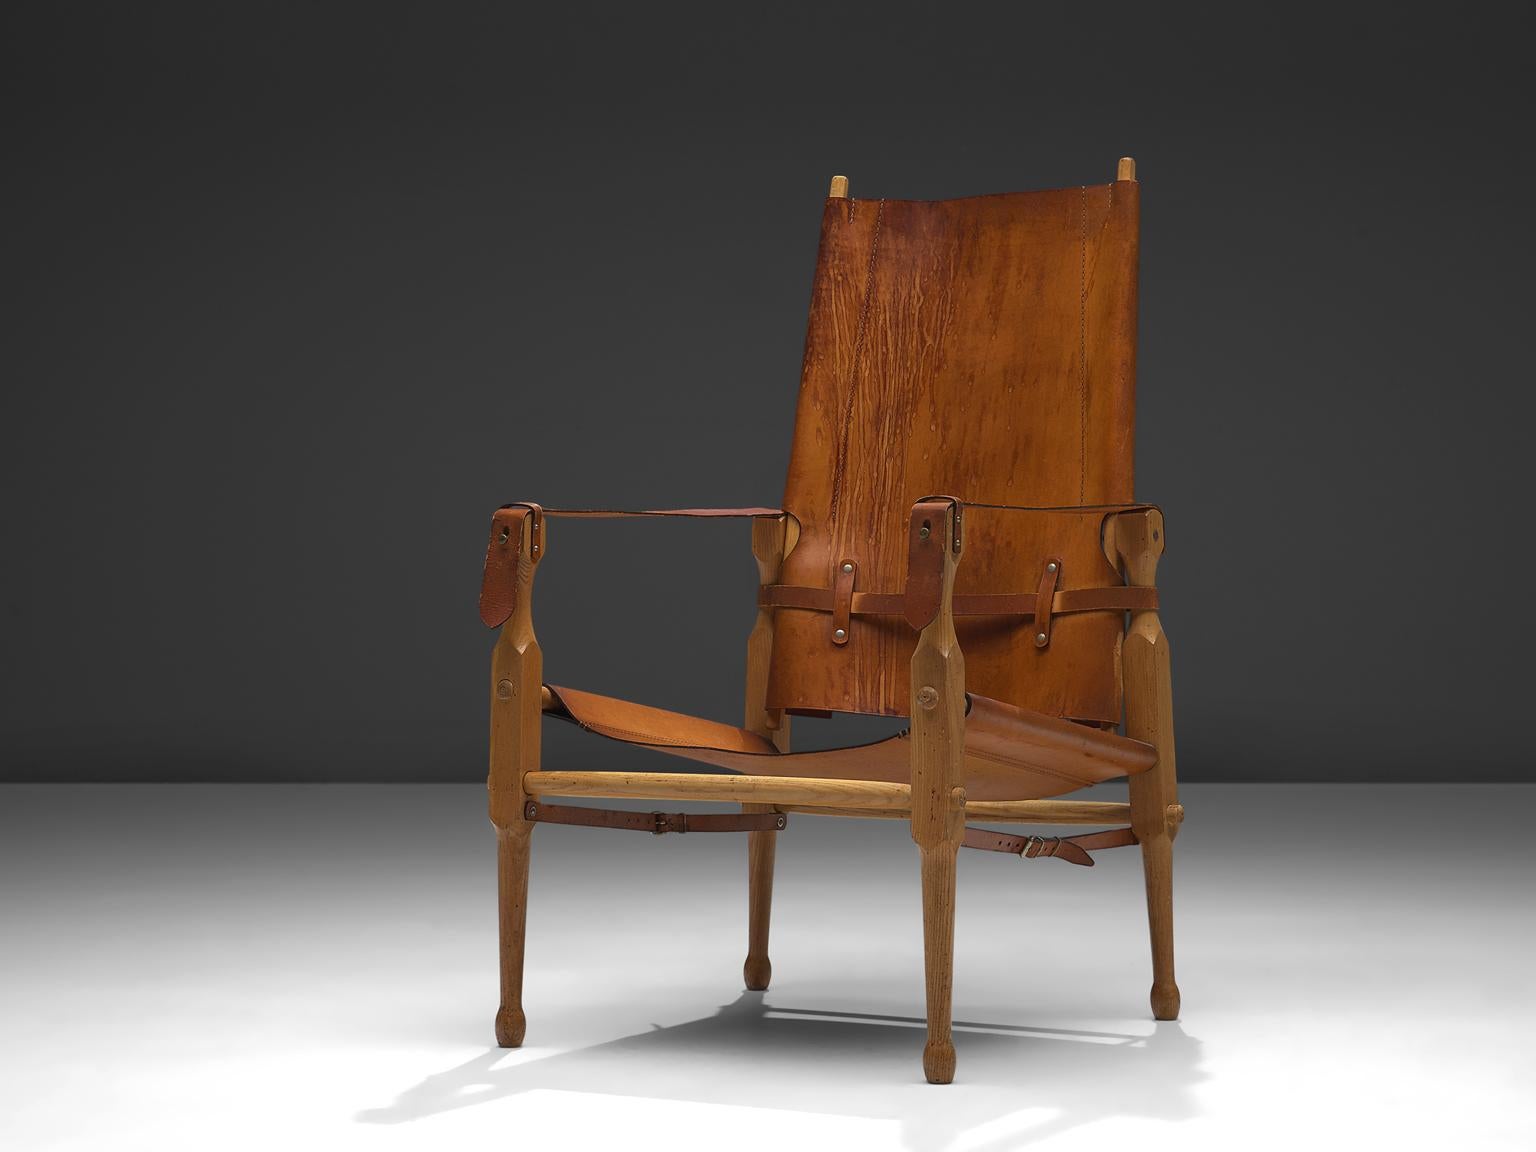 Wonderful 'Safari' lounge chair in natural cognac leather and solid beech frame, Denmark, 1960s.

This 'Safari' armchair shows very elegant and well designed lines, in combination with carefully crafted wood joints. The cognac leather with multiple